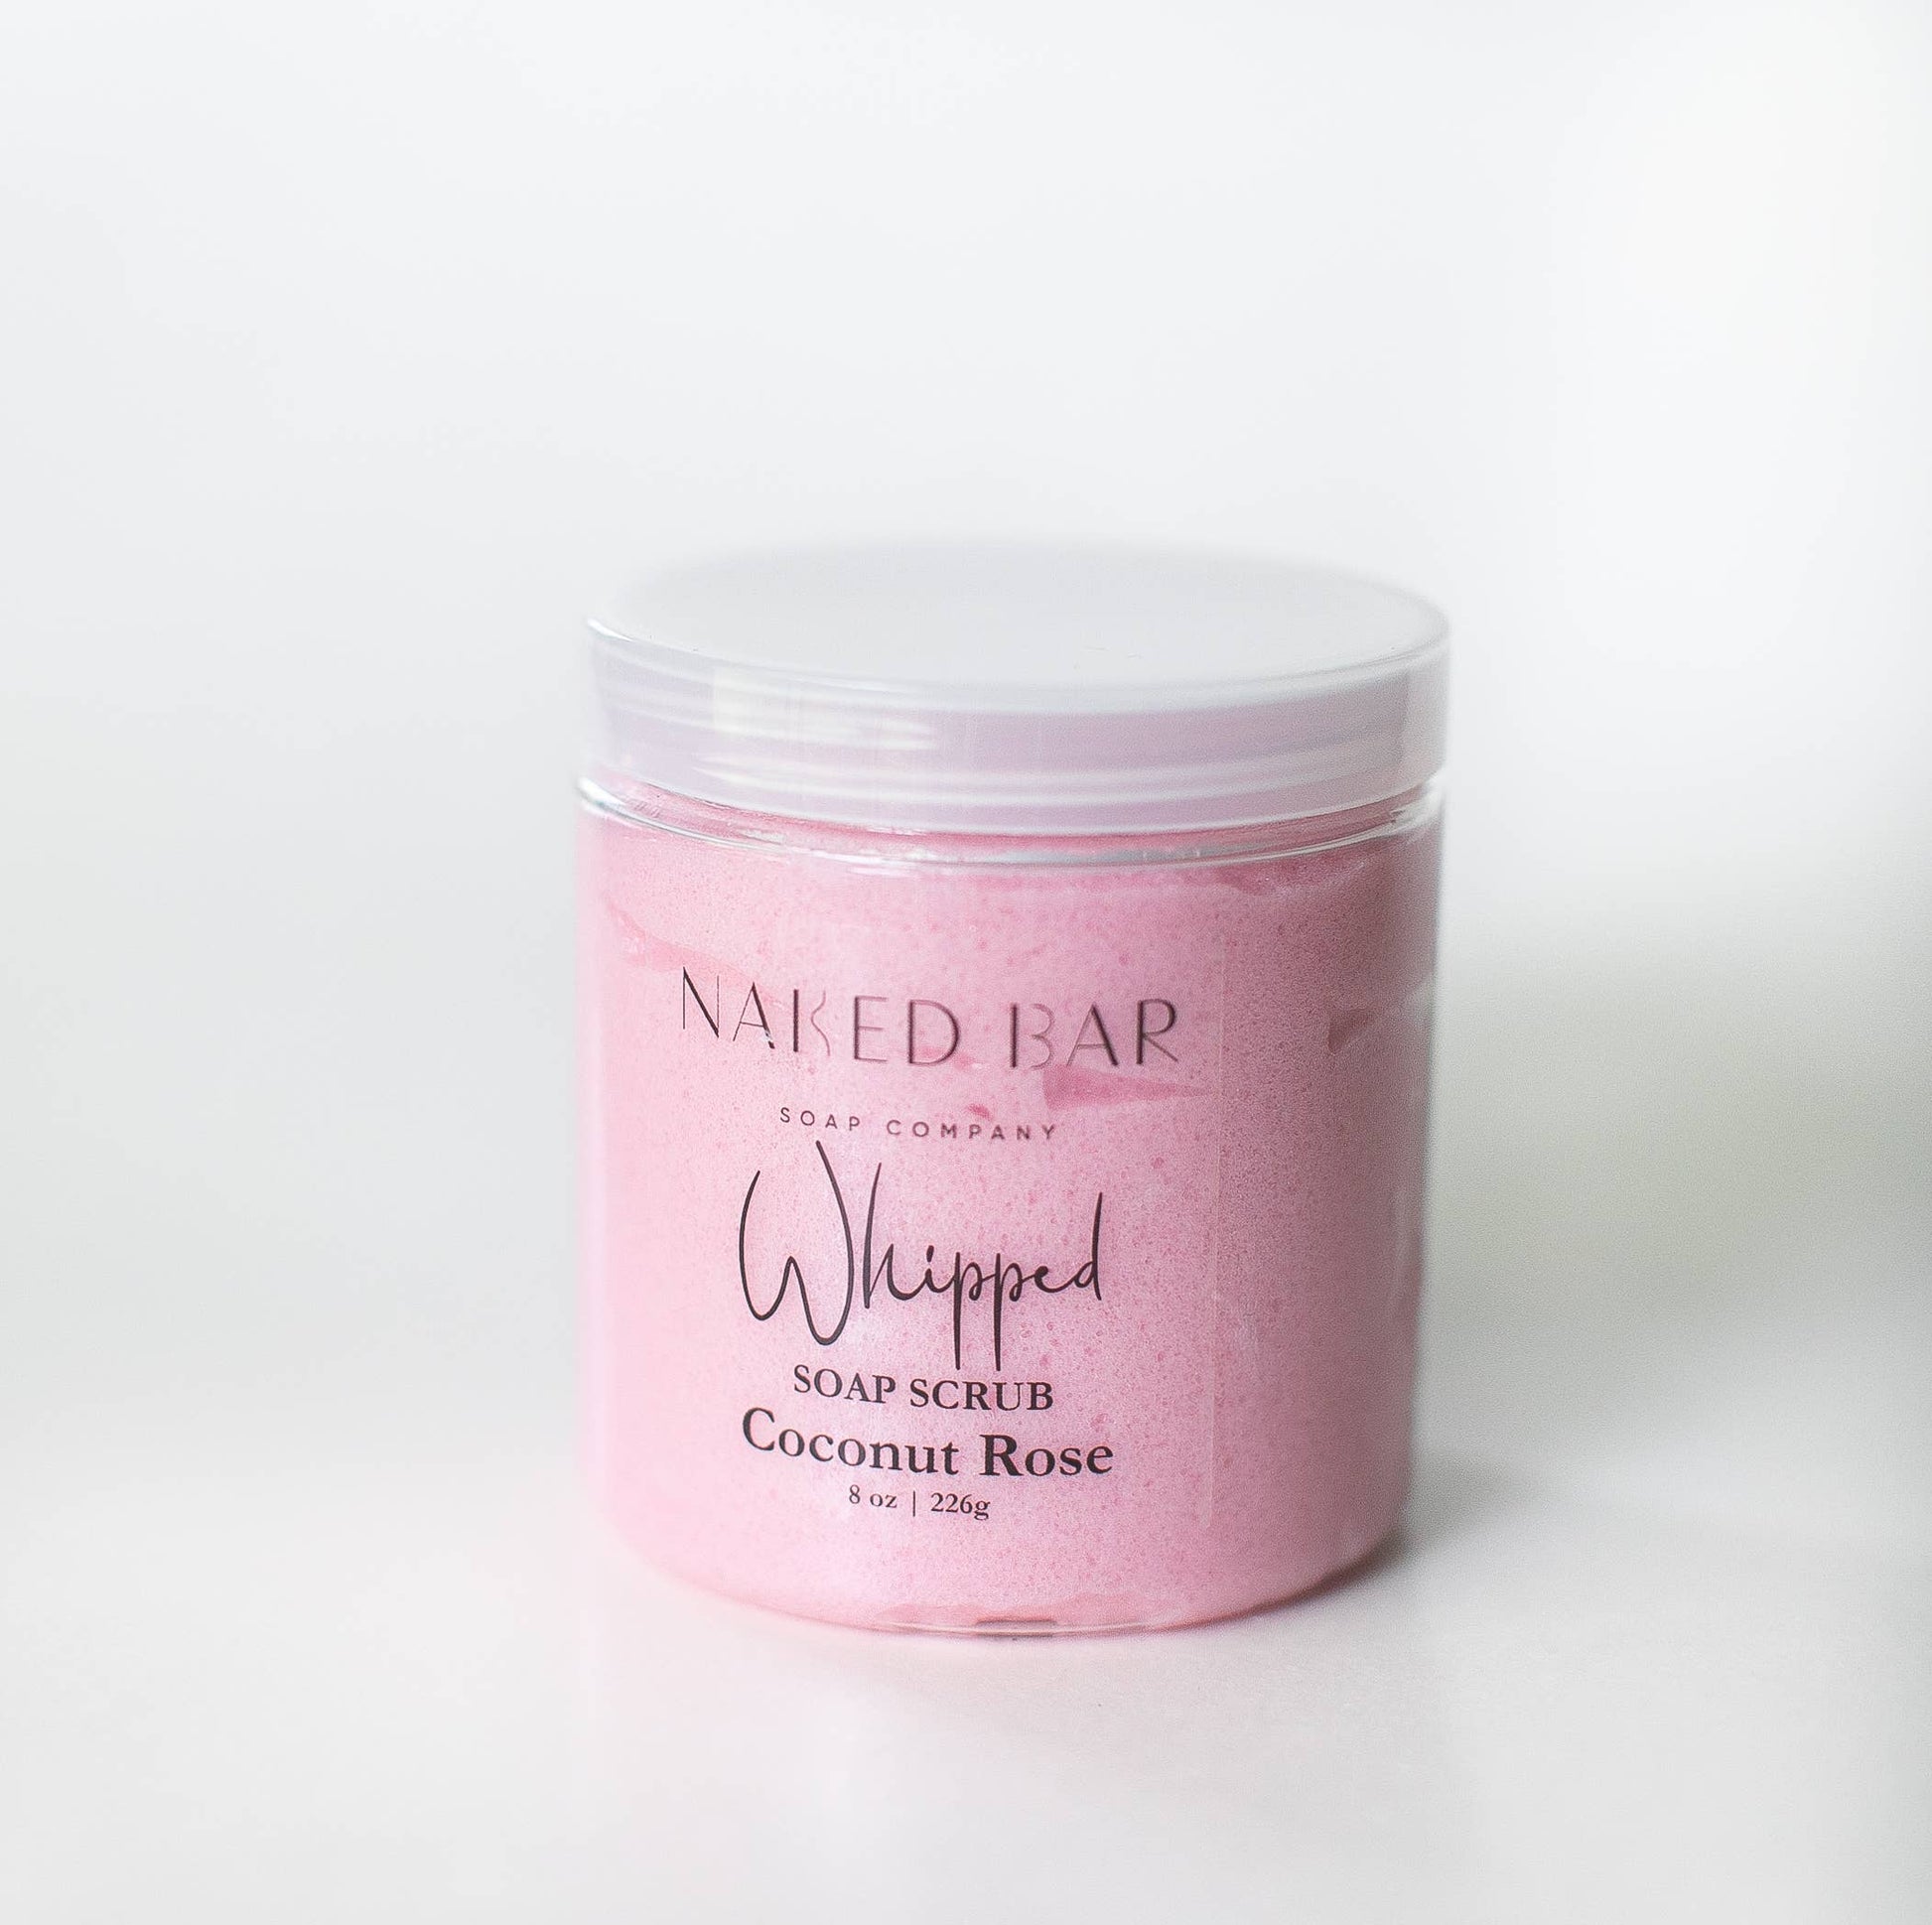 Coconut Rose Whipped Soap Scrub Core Naked Bar Soap Co.